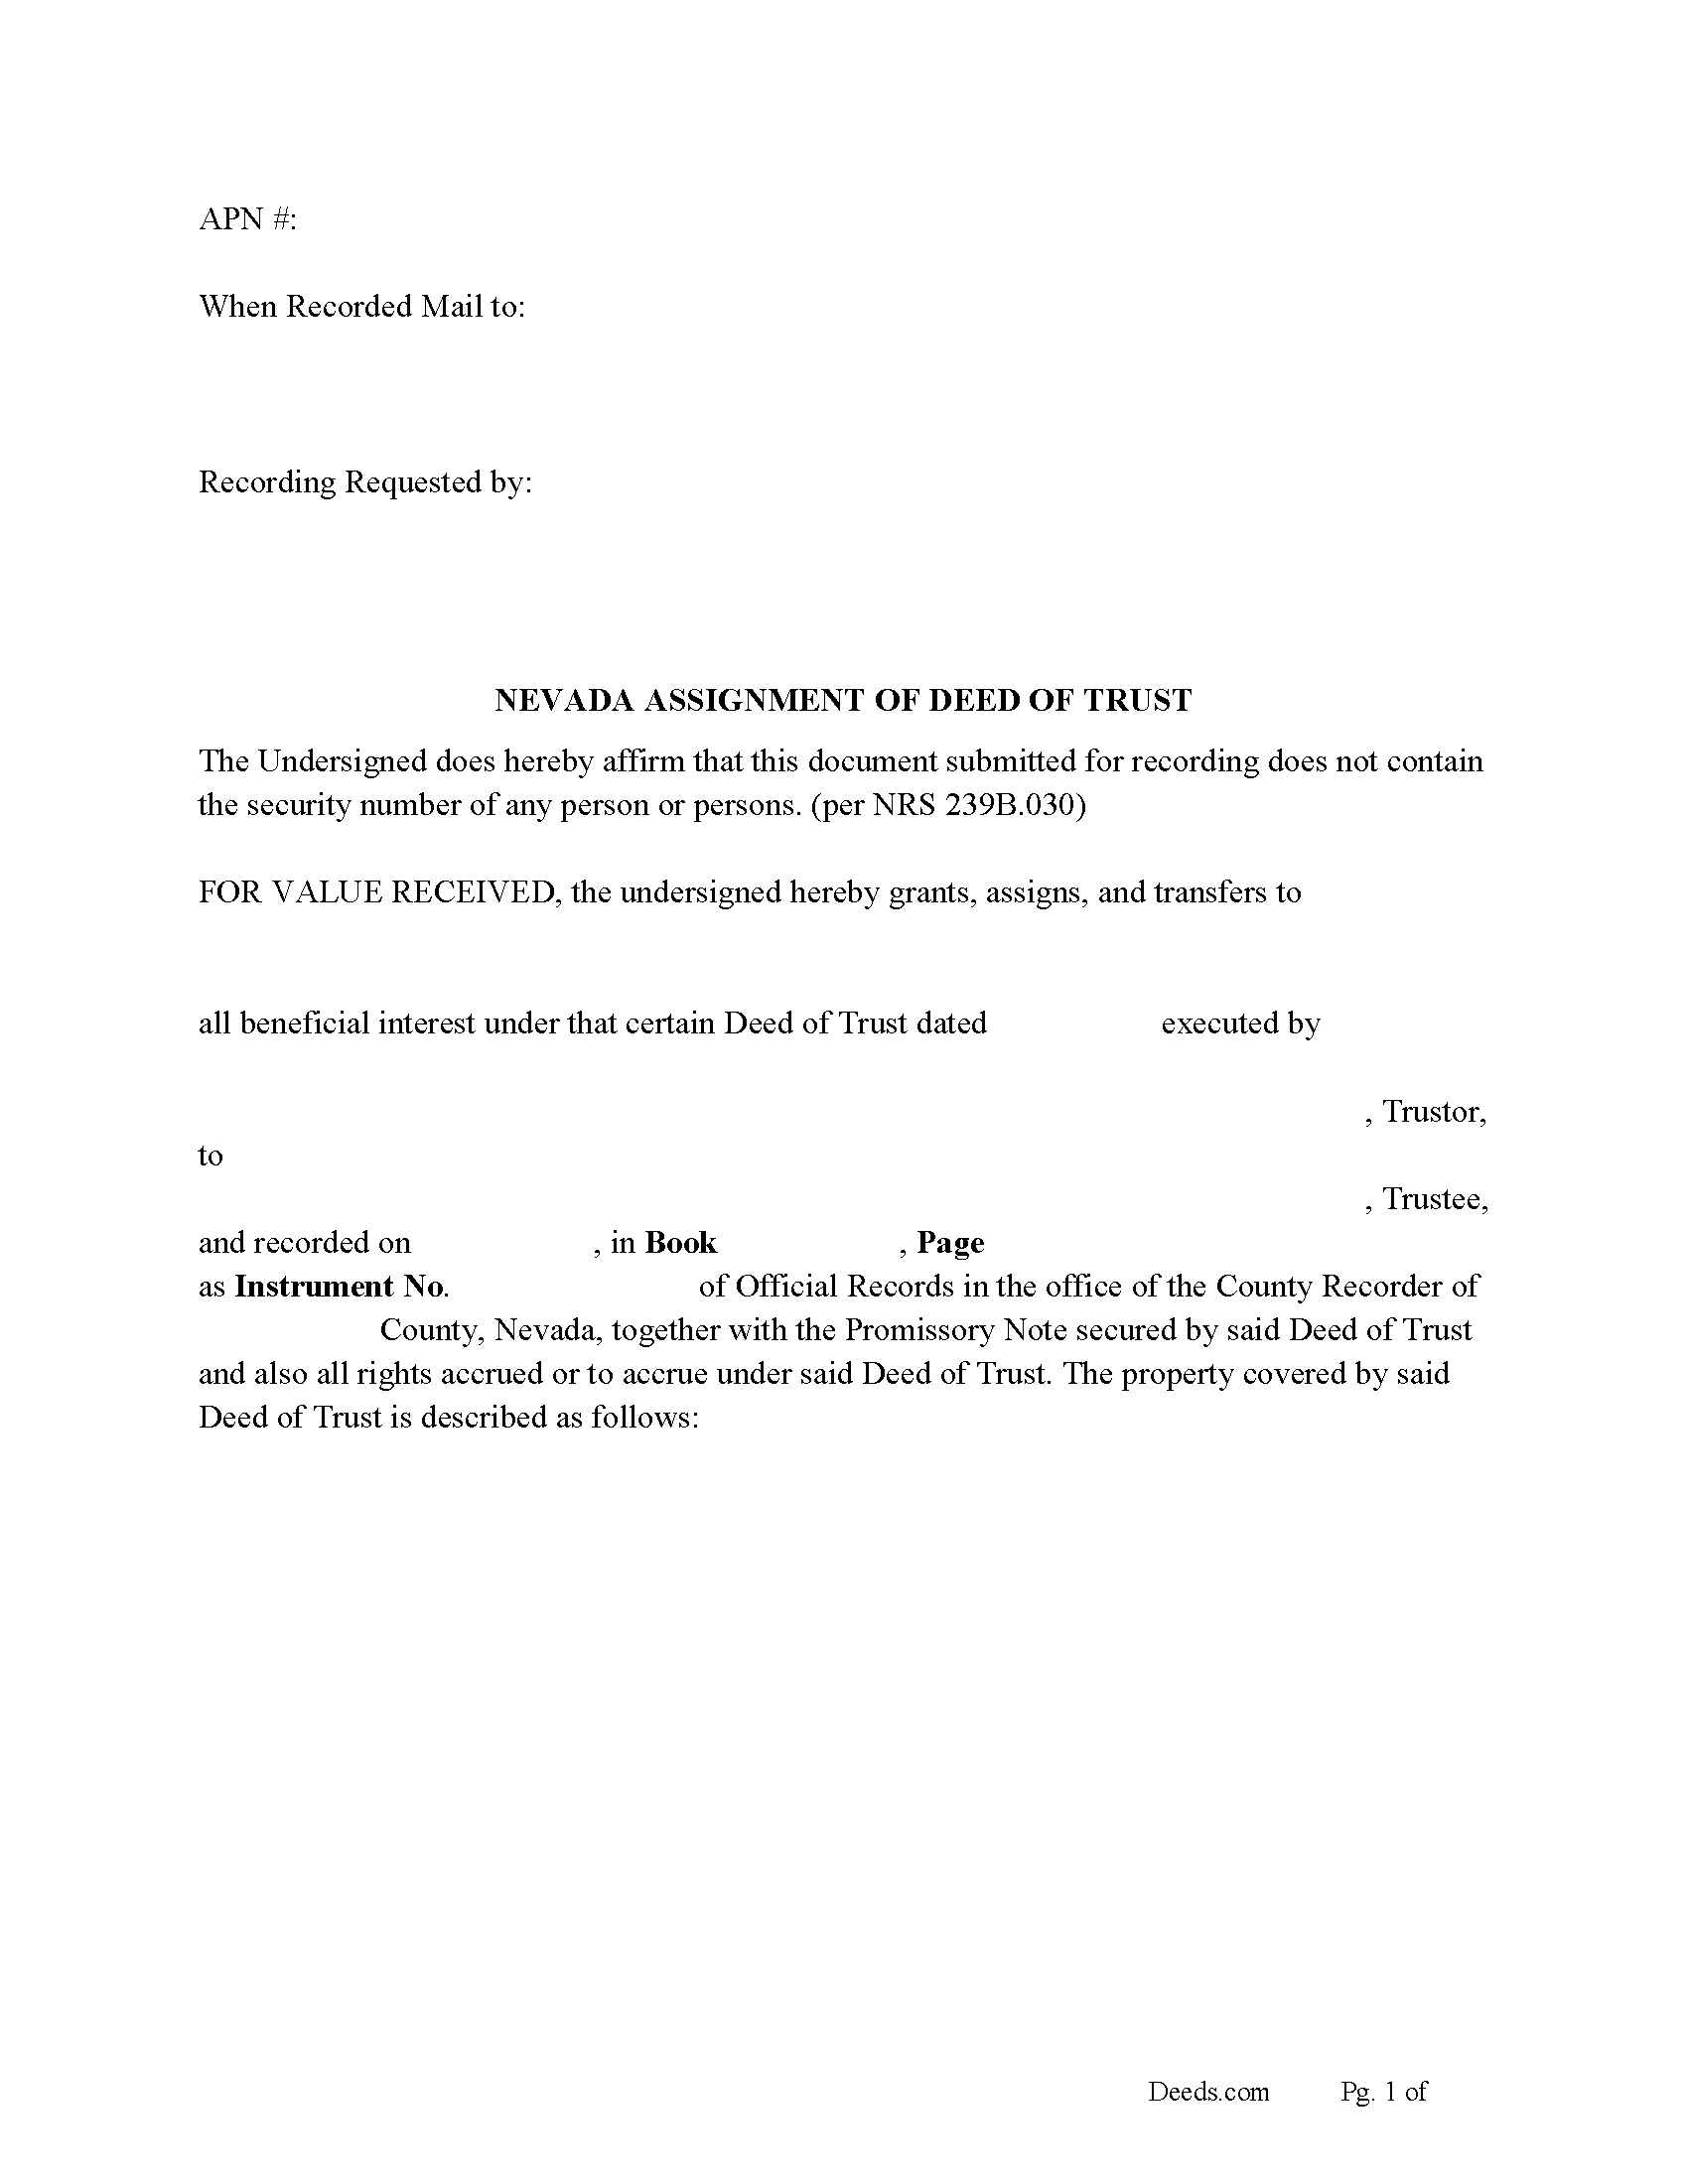 Assignment of Deed of Trust Form